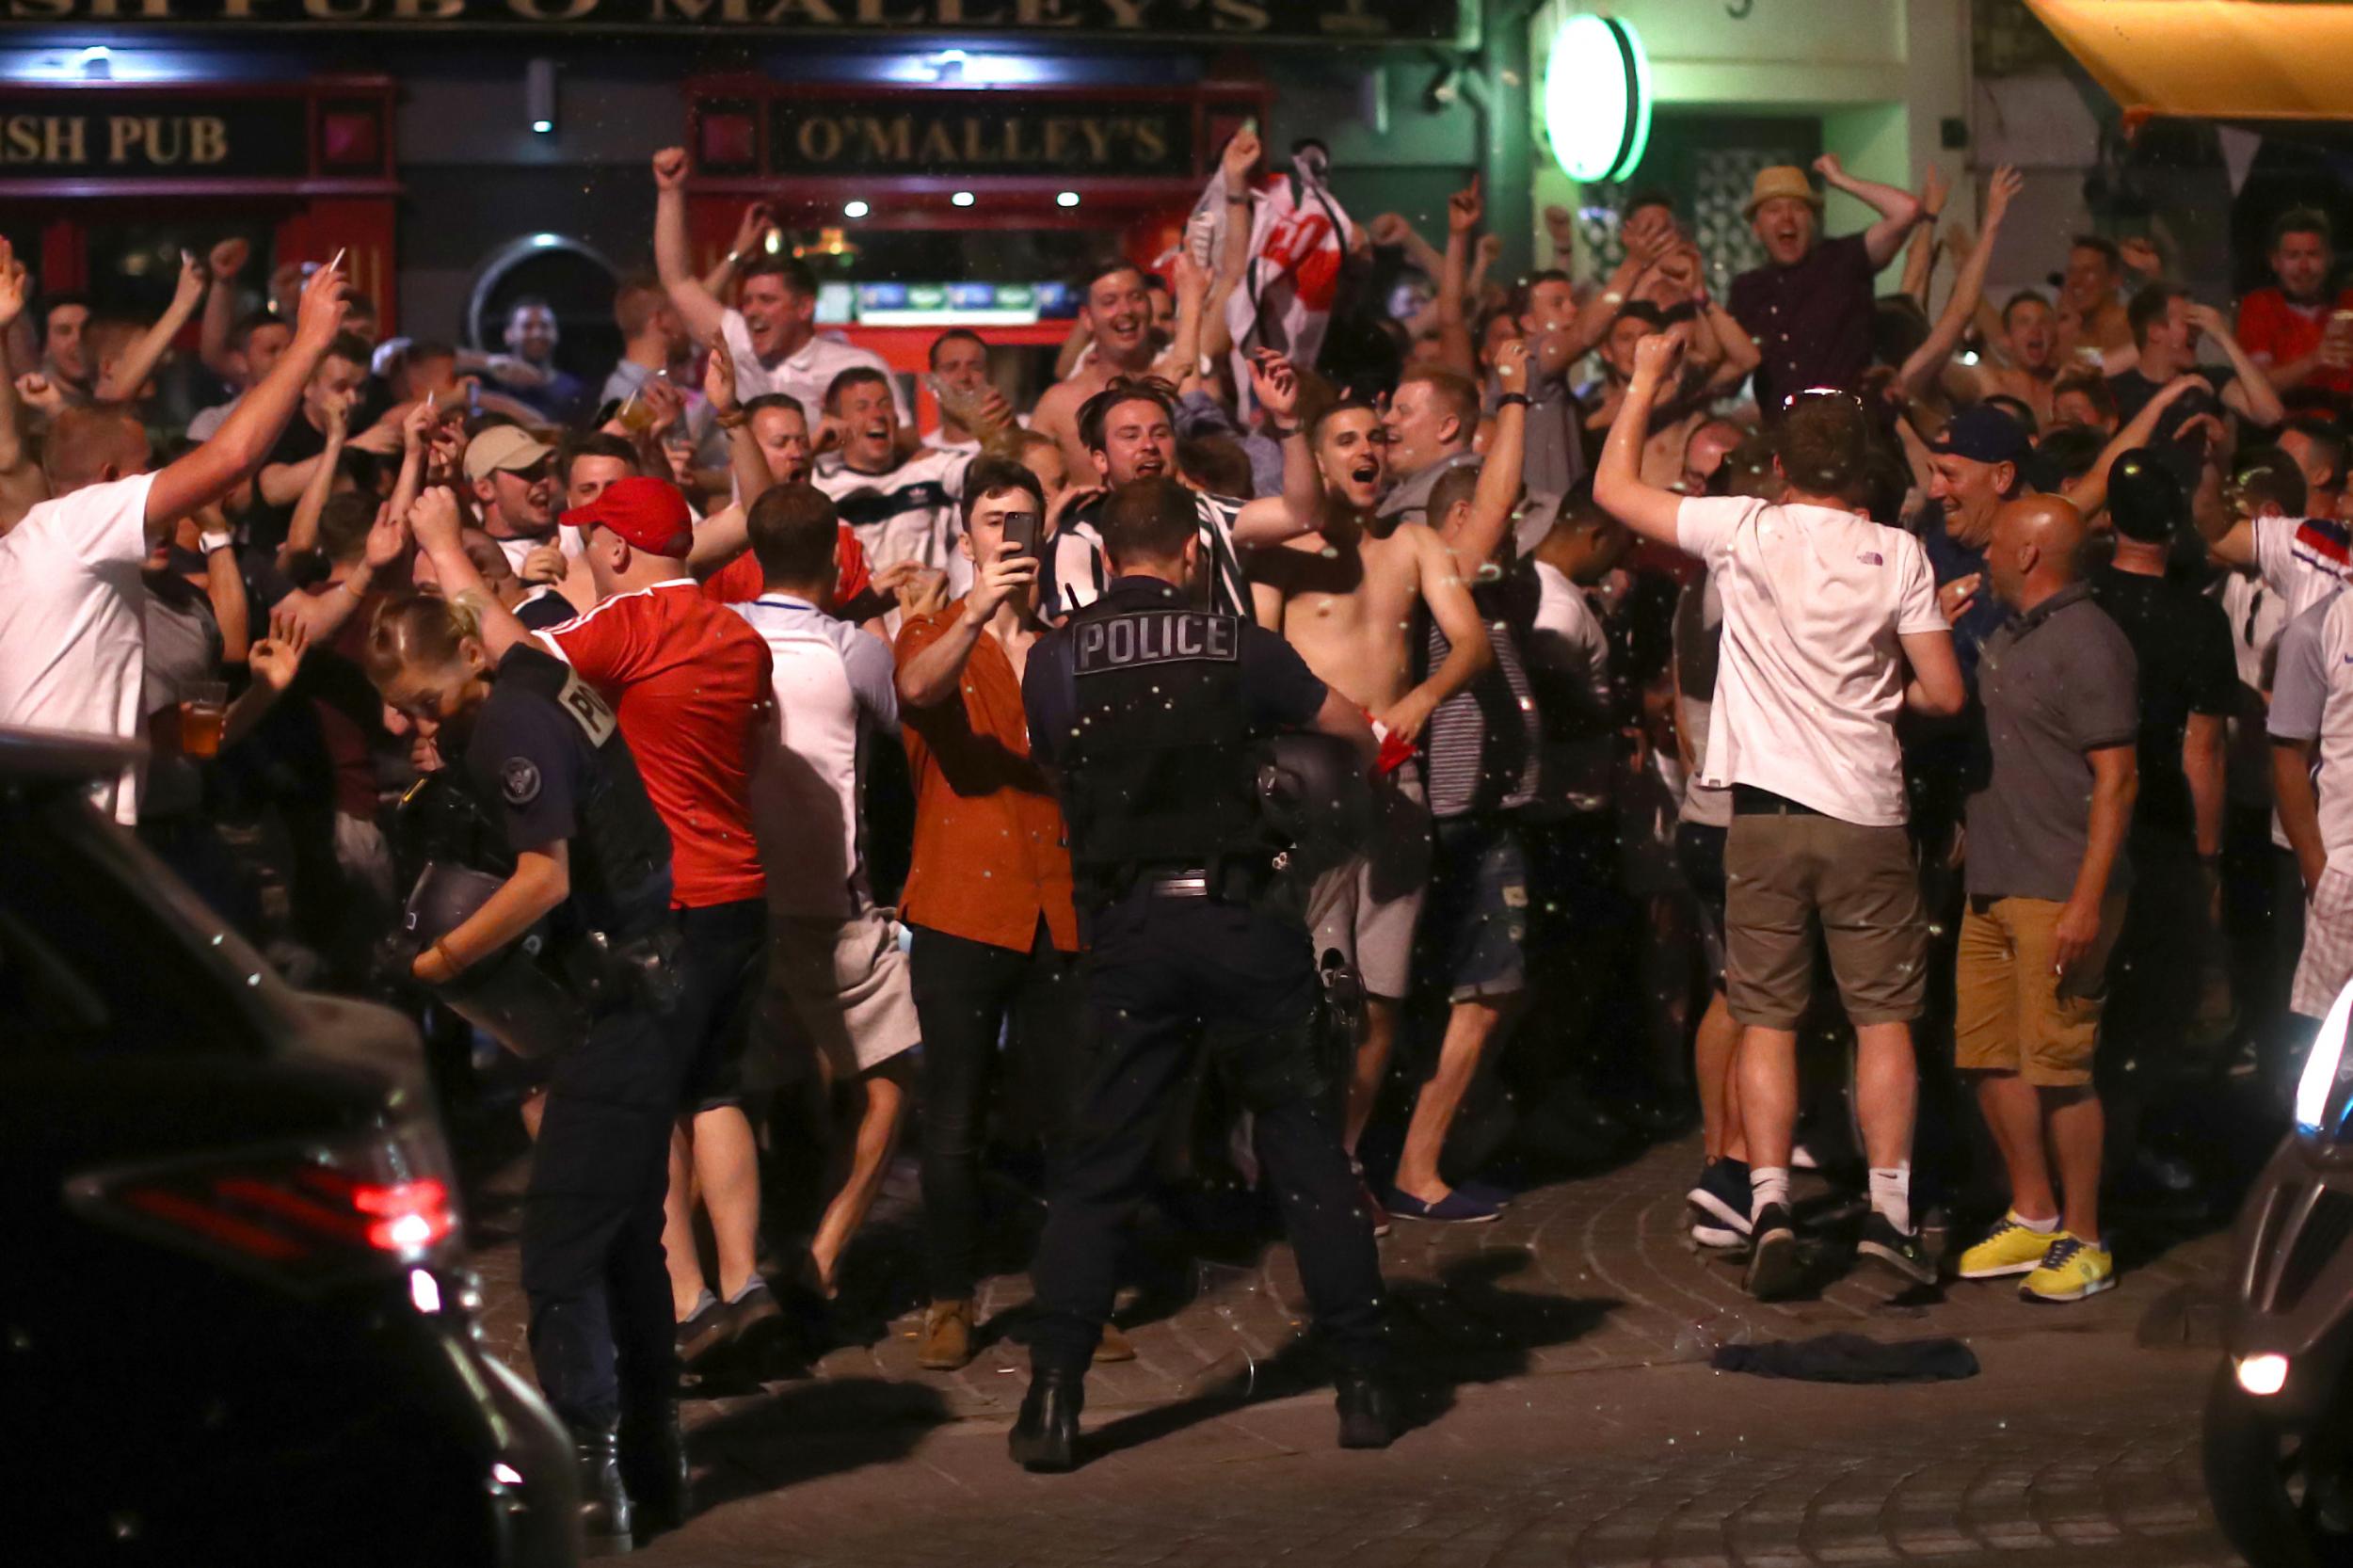 England fans' misbehaviour abroad has been cited as a reason by those opposing change